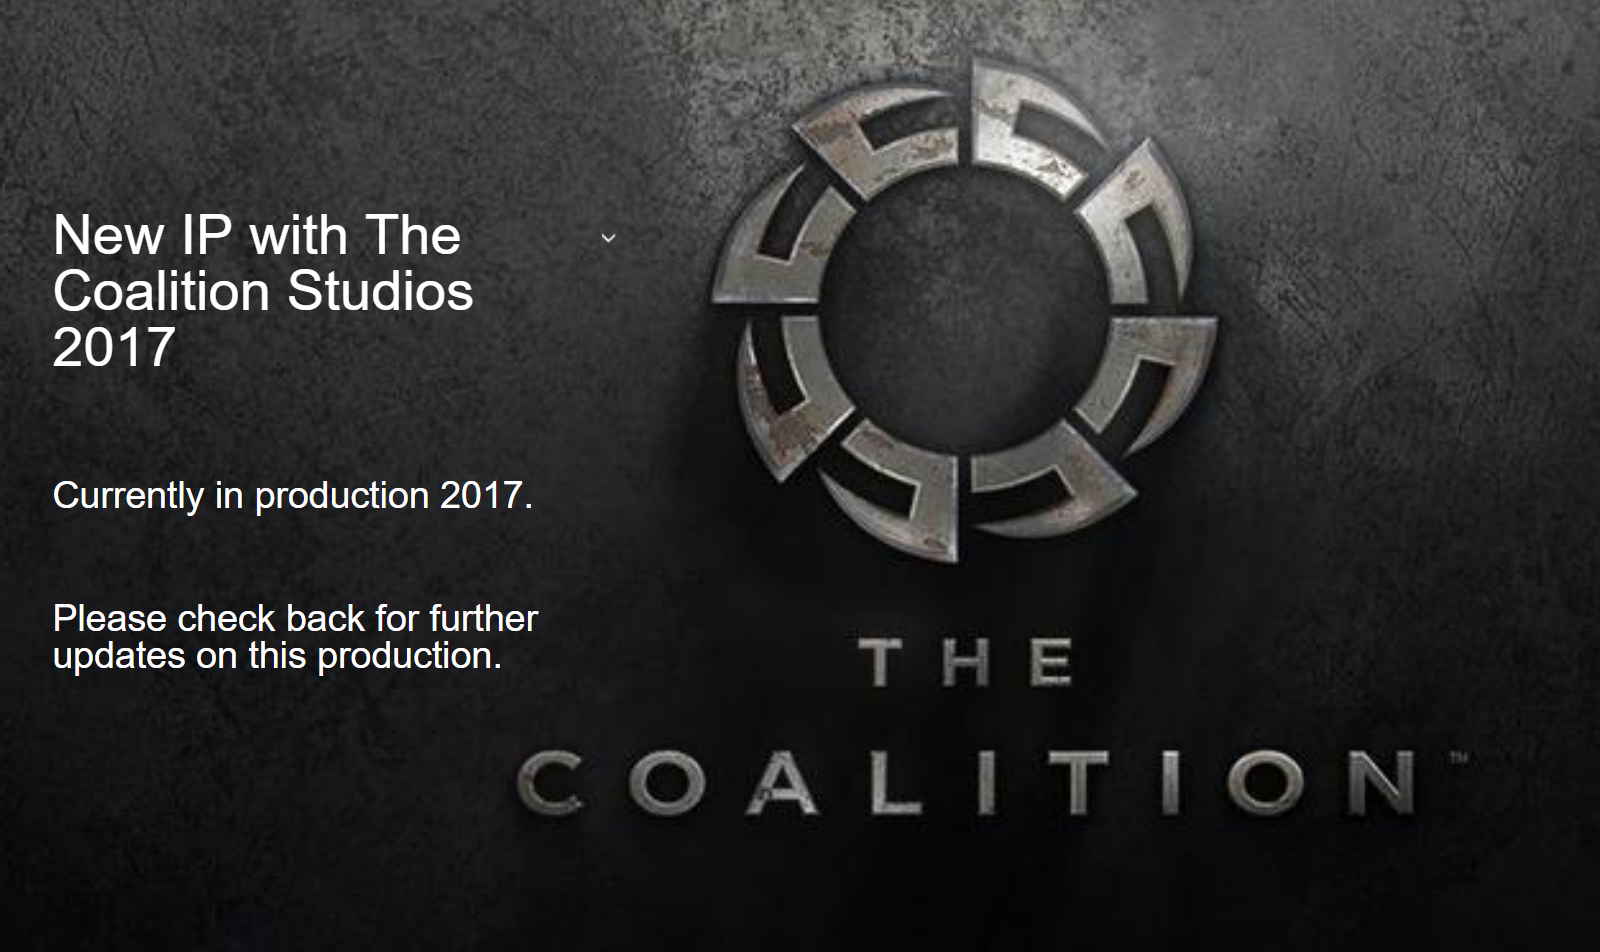 gears of war storylab productions